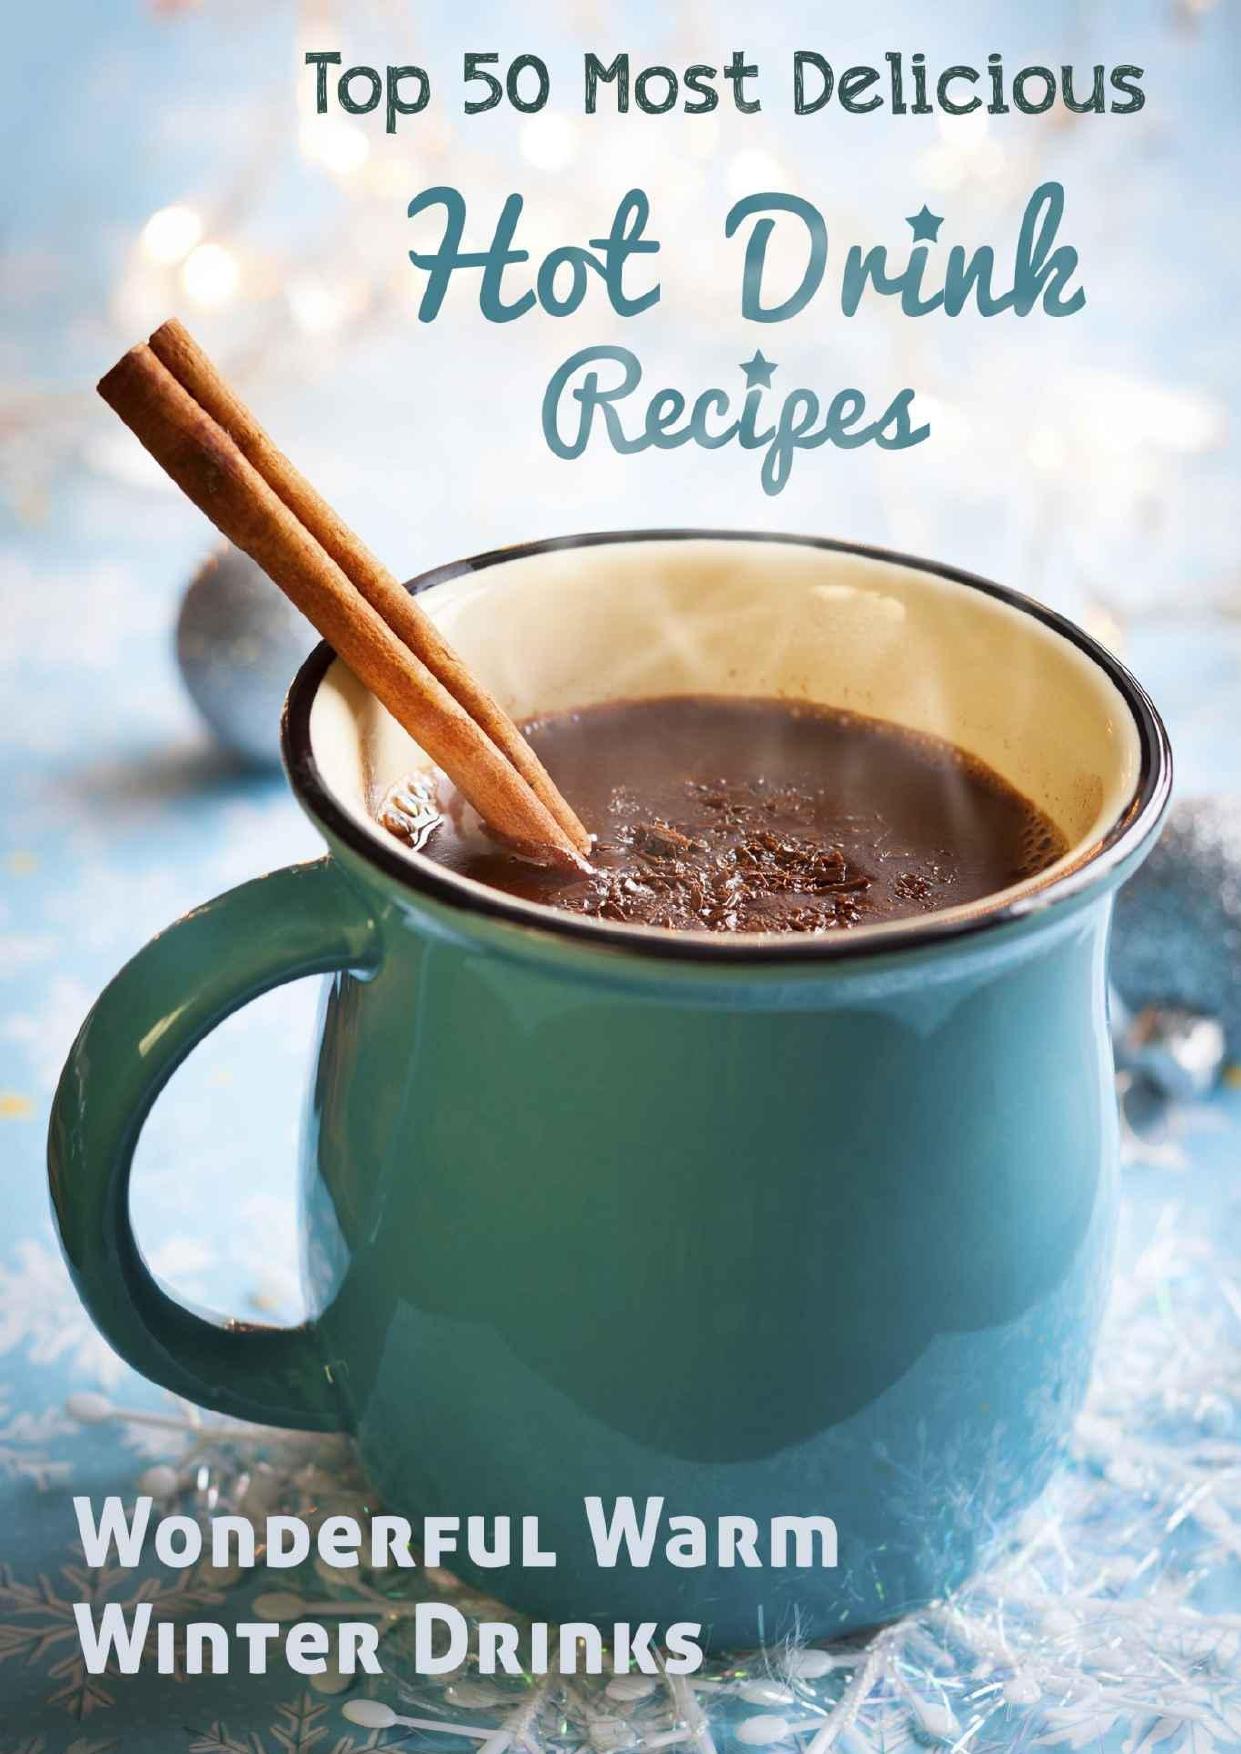 Top 50 Most Delicious Hot Drink Recipes: Stay Warm and Cozy with these Wonderful Warm Winter Drinks (Recipe Top 50's Book 53) by Nieizv